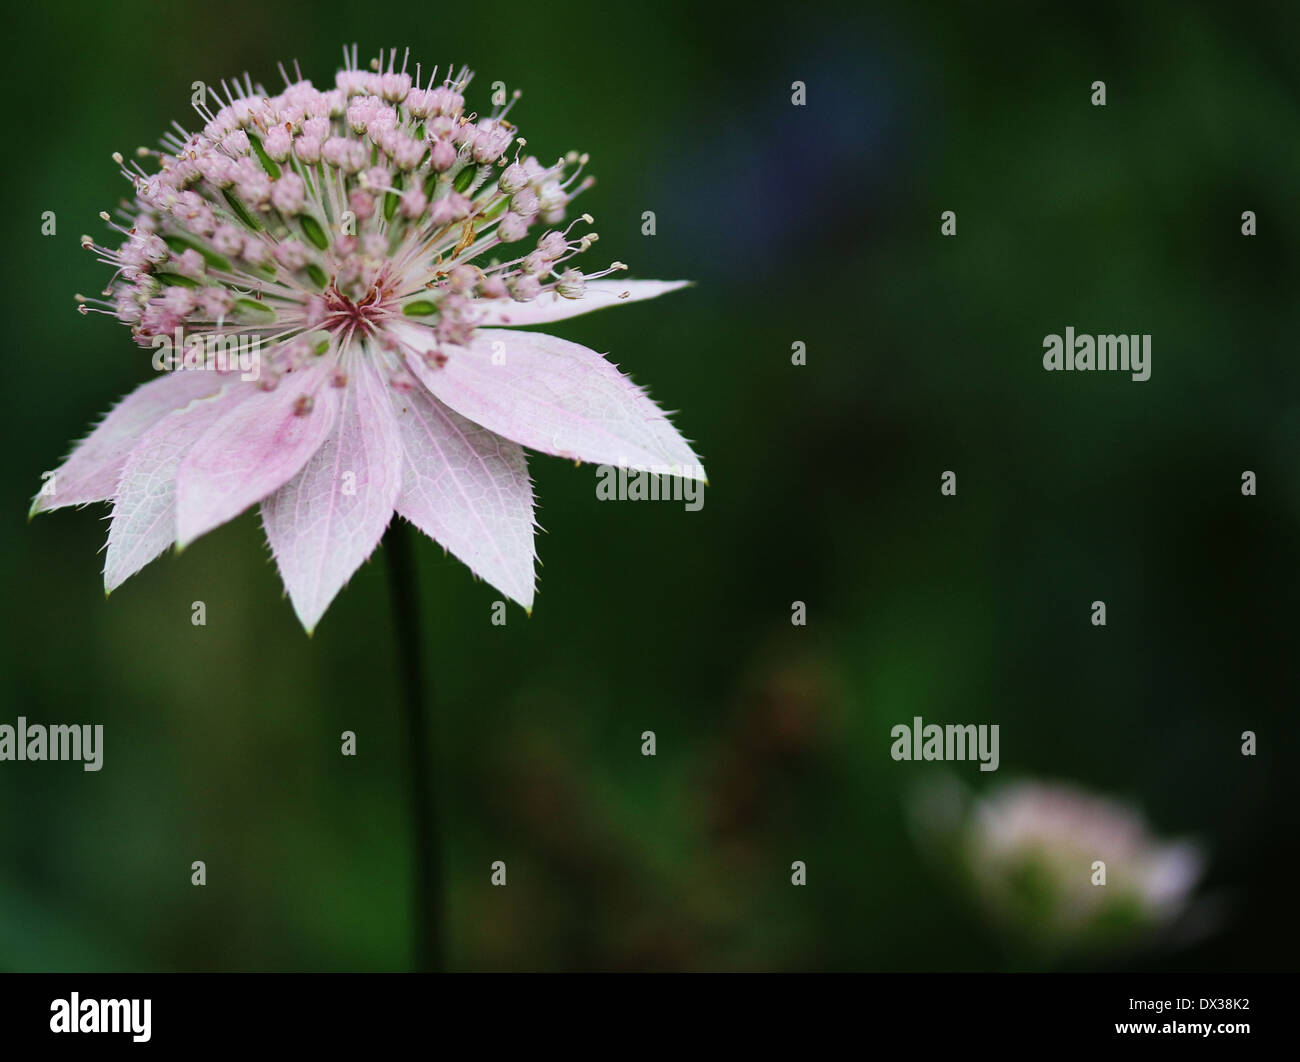 Close up of a single Astrantia flower head comprising soft pink bracts and flower stamens against a soft focus green background. Stock Photo